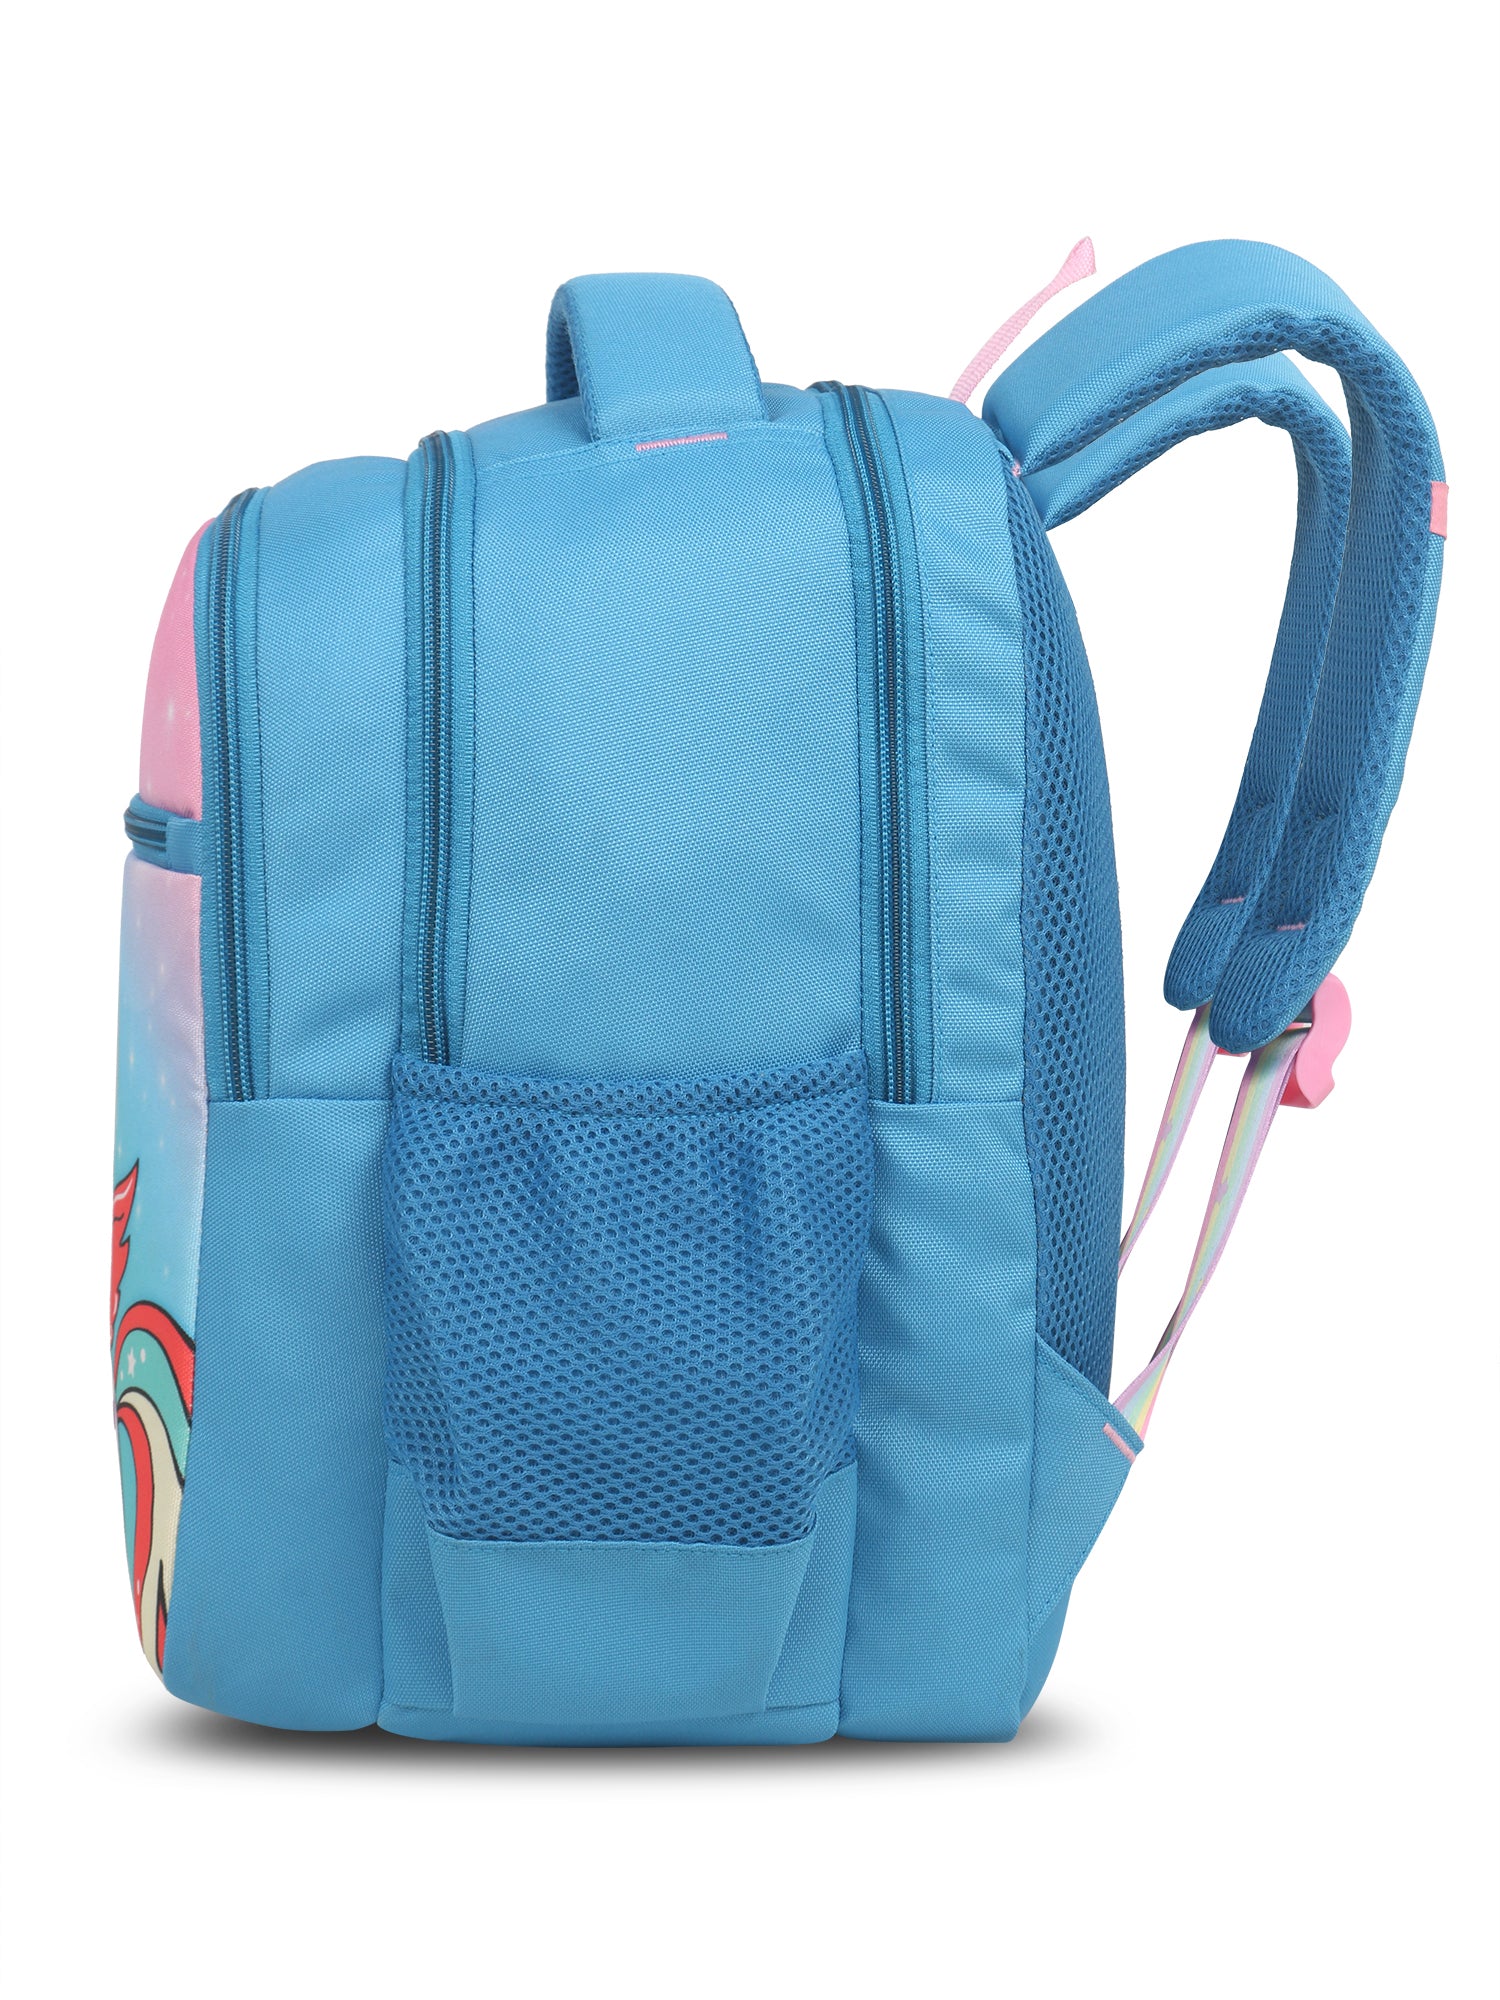 Marvel priority School Backpack,Side Bottle Holder :: 2,1st to 4th class School Bags cute printed , blue, unicorn school bag , blue and pink